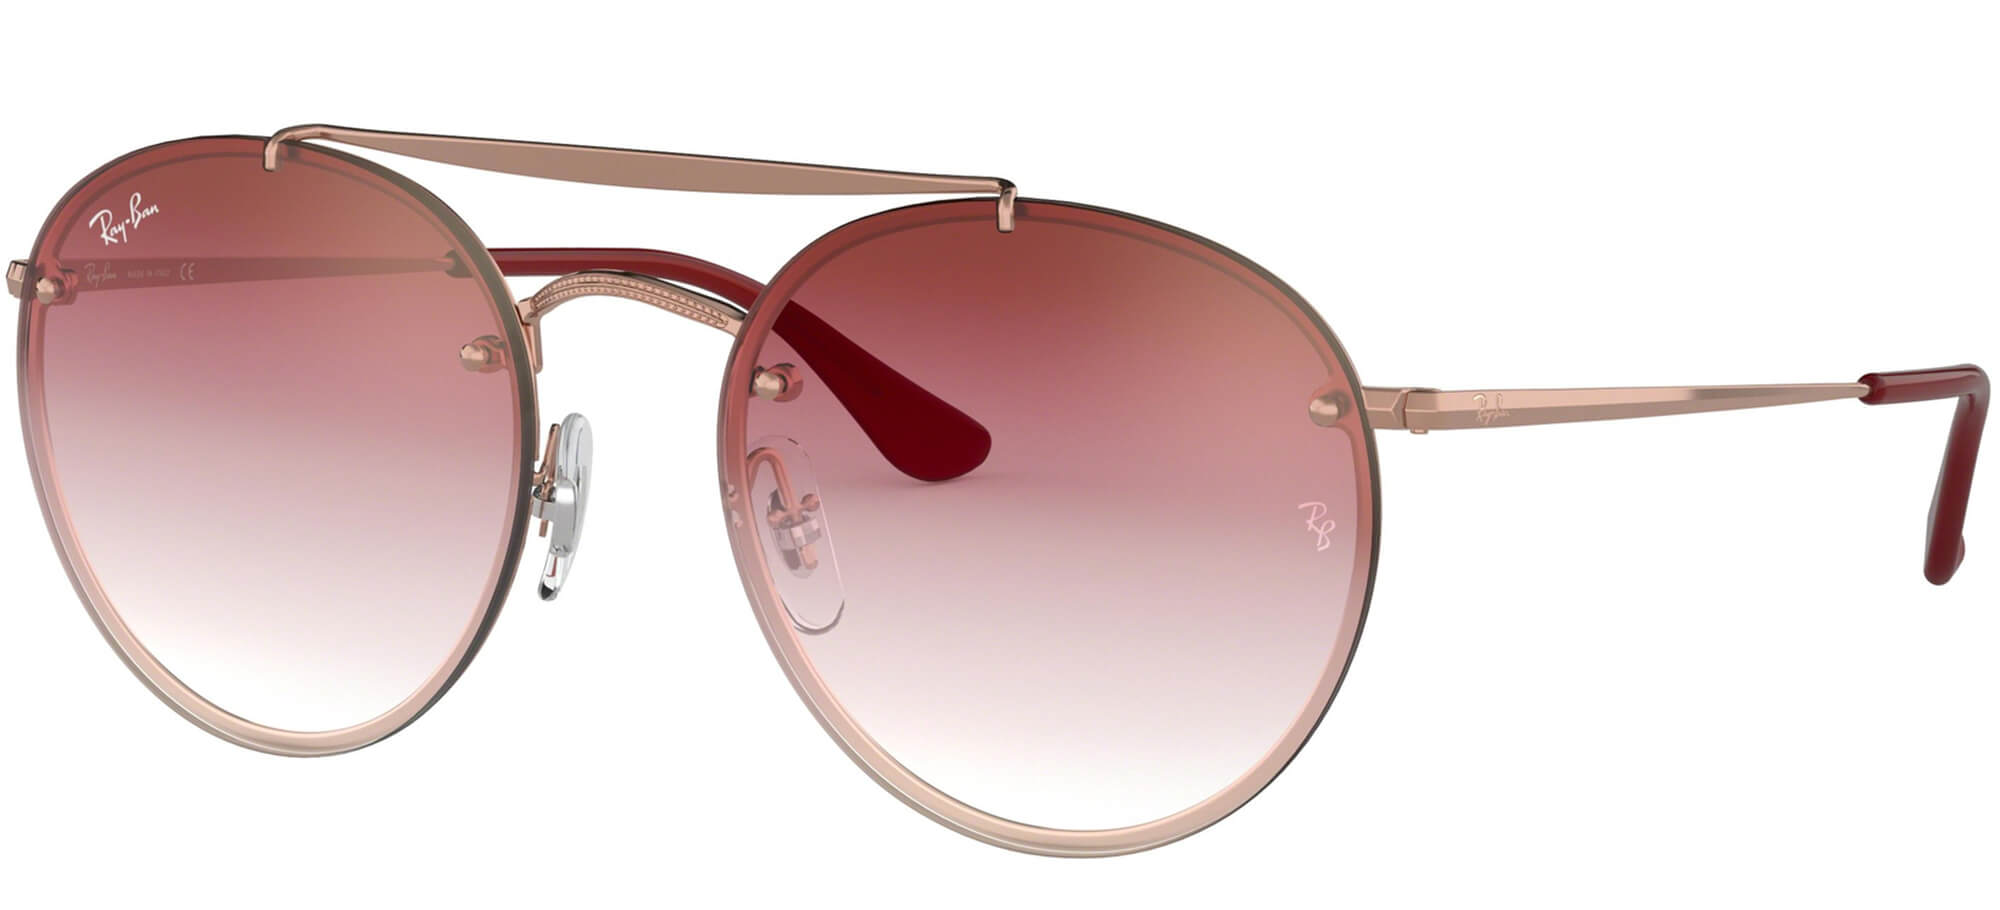 Ray-BanBLAZE RB 3614NCopper/brown Pink Shaded (9141/0T)